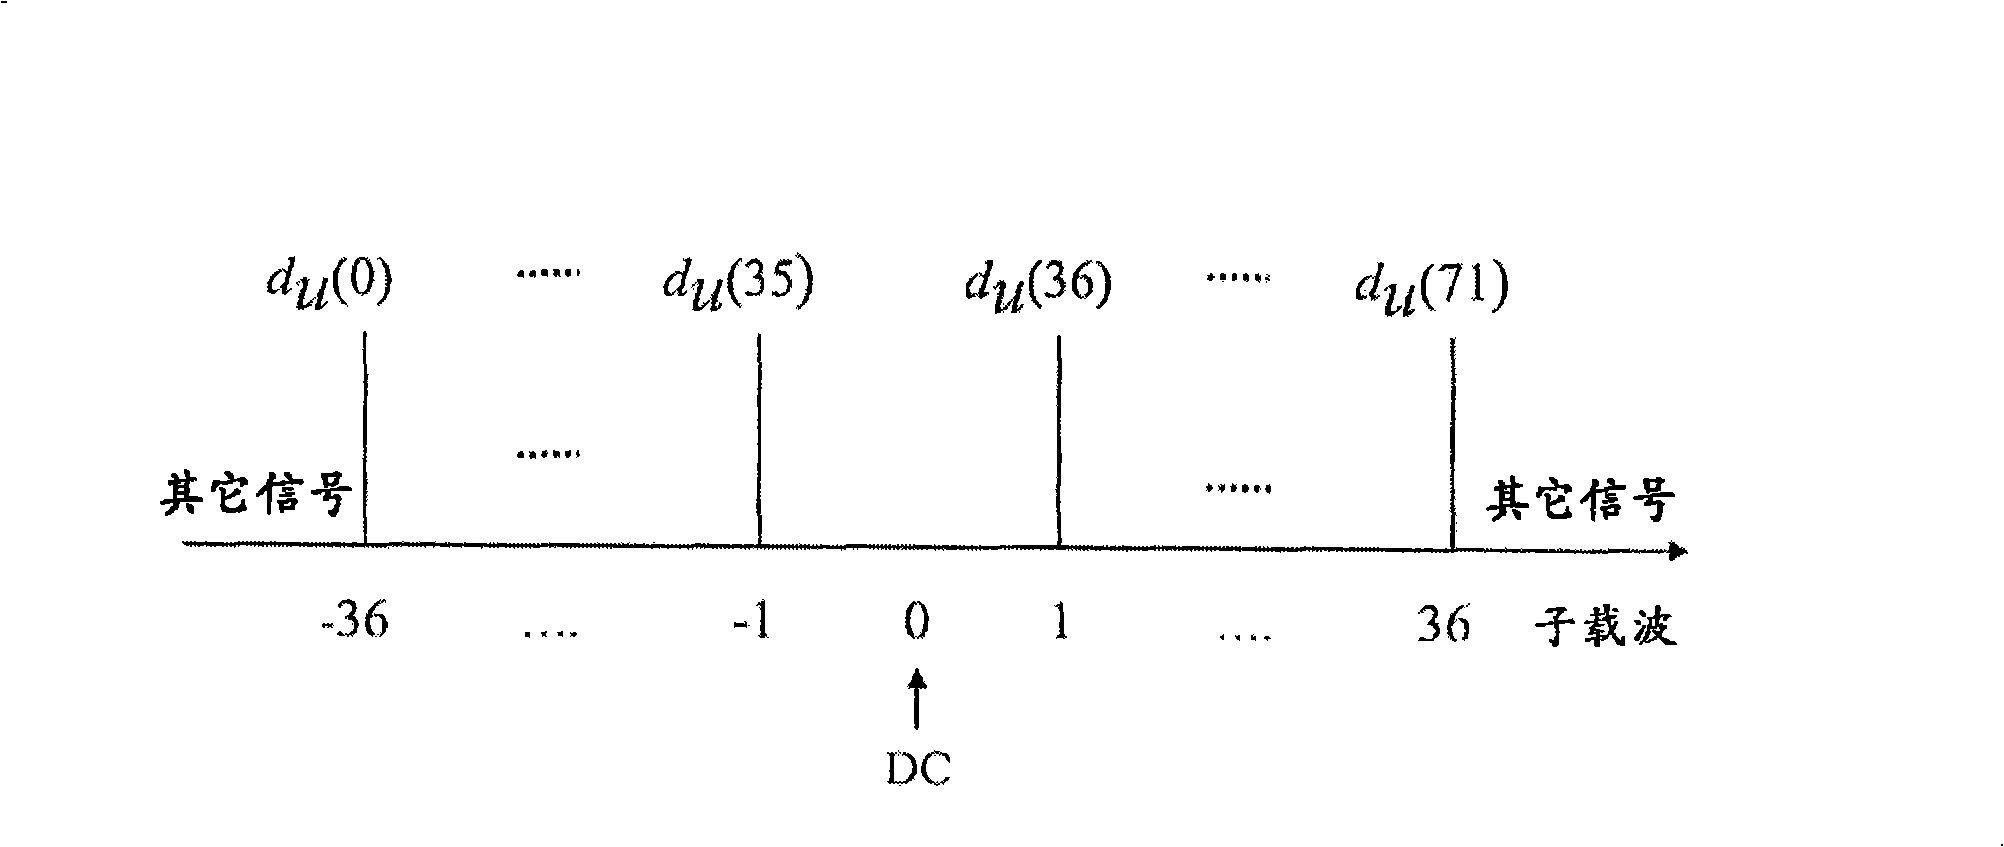 Method and apparatus of establishing a synchronisation signal in a communication system